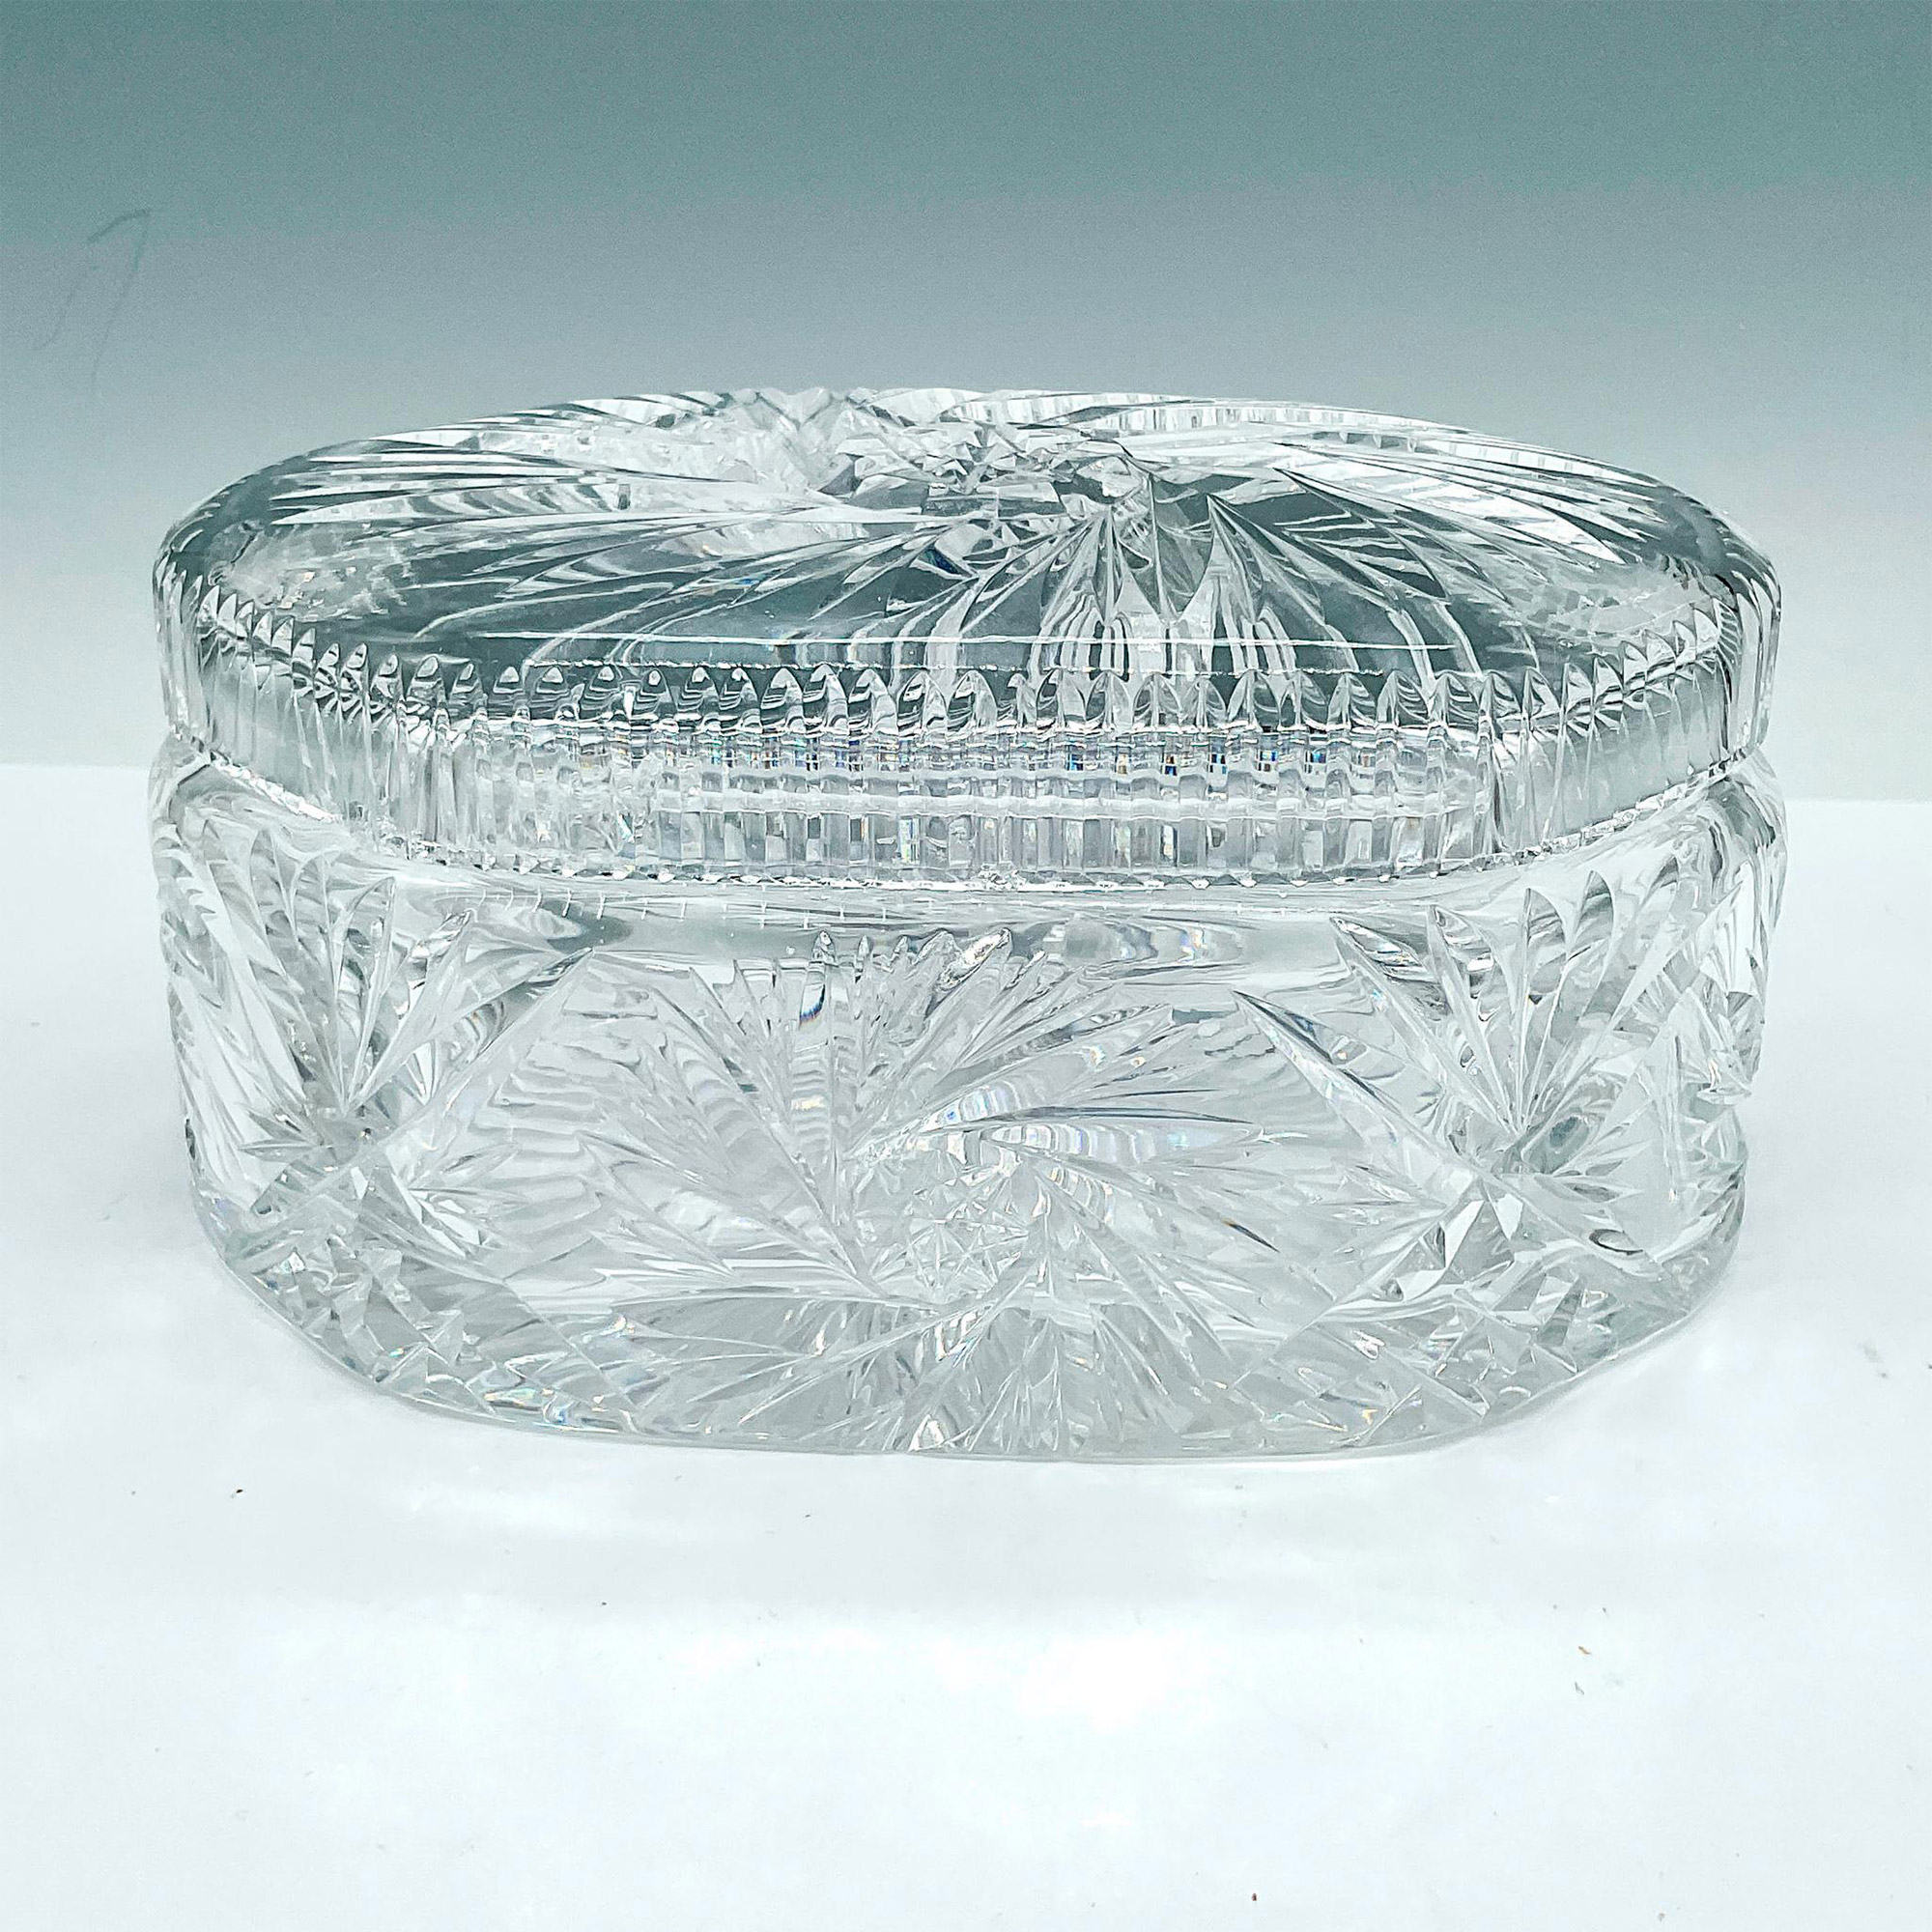 2pc Irena Crystal Lidded Cookie Jar and Box - Image 5 of 9